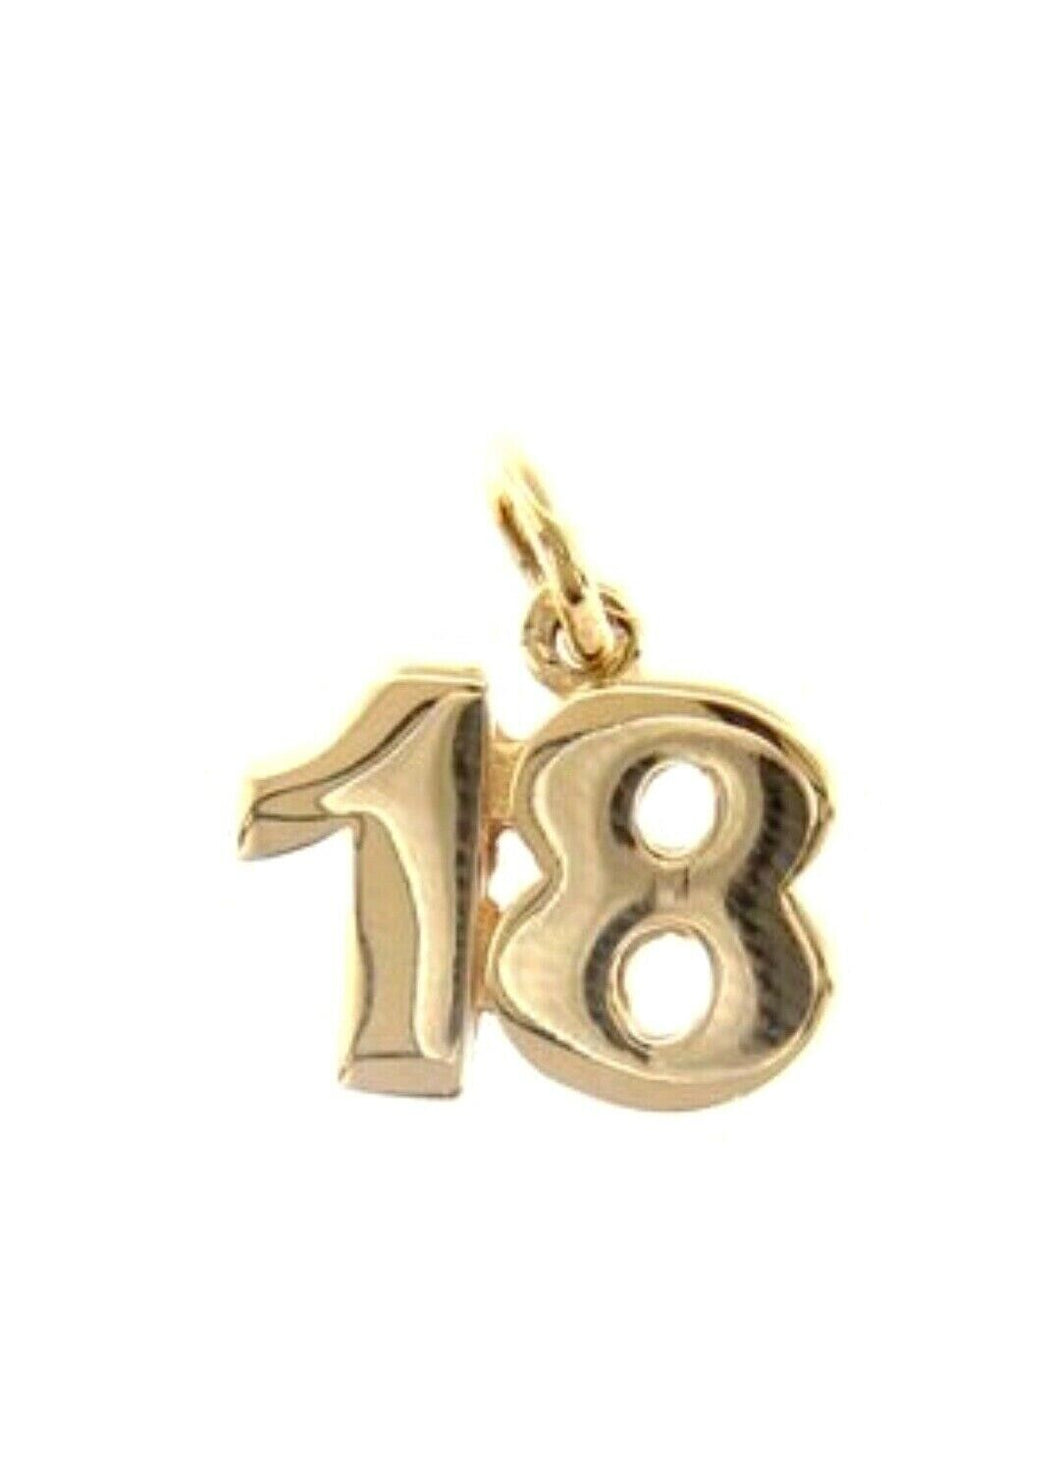 18k yellow gold number 18 eighteen small pendant charm, 0.4